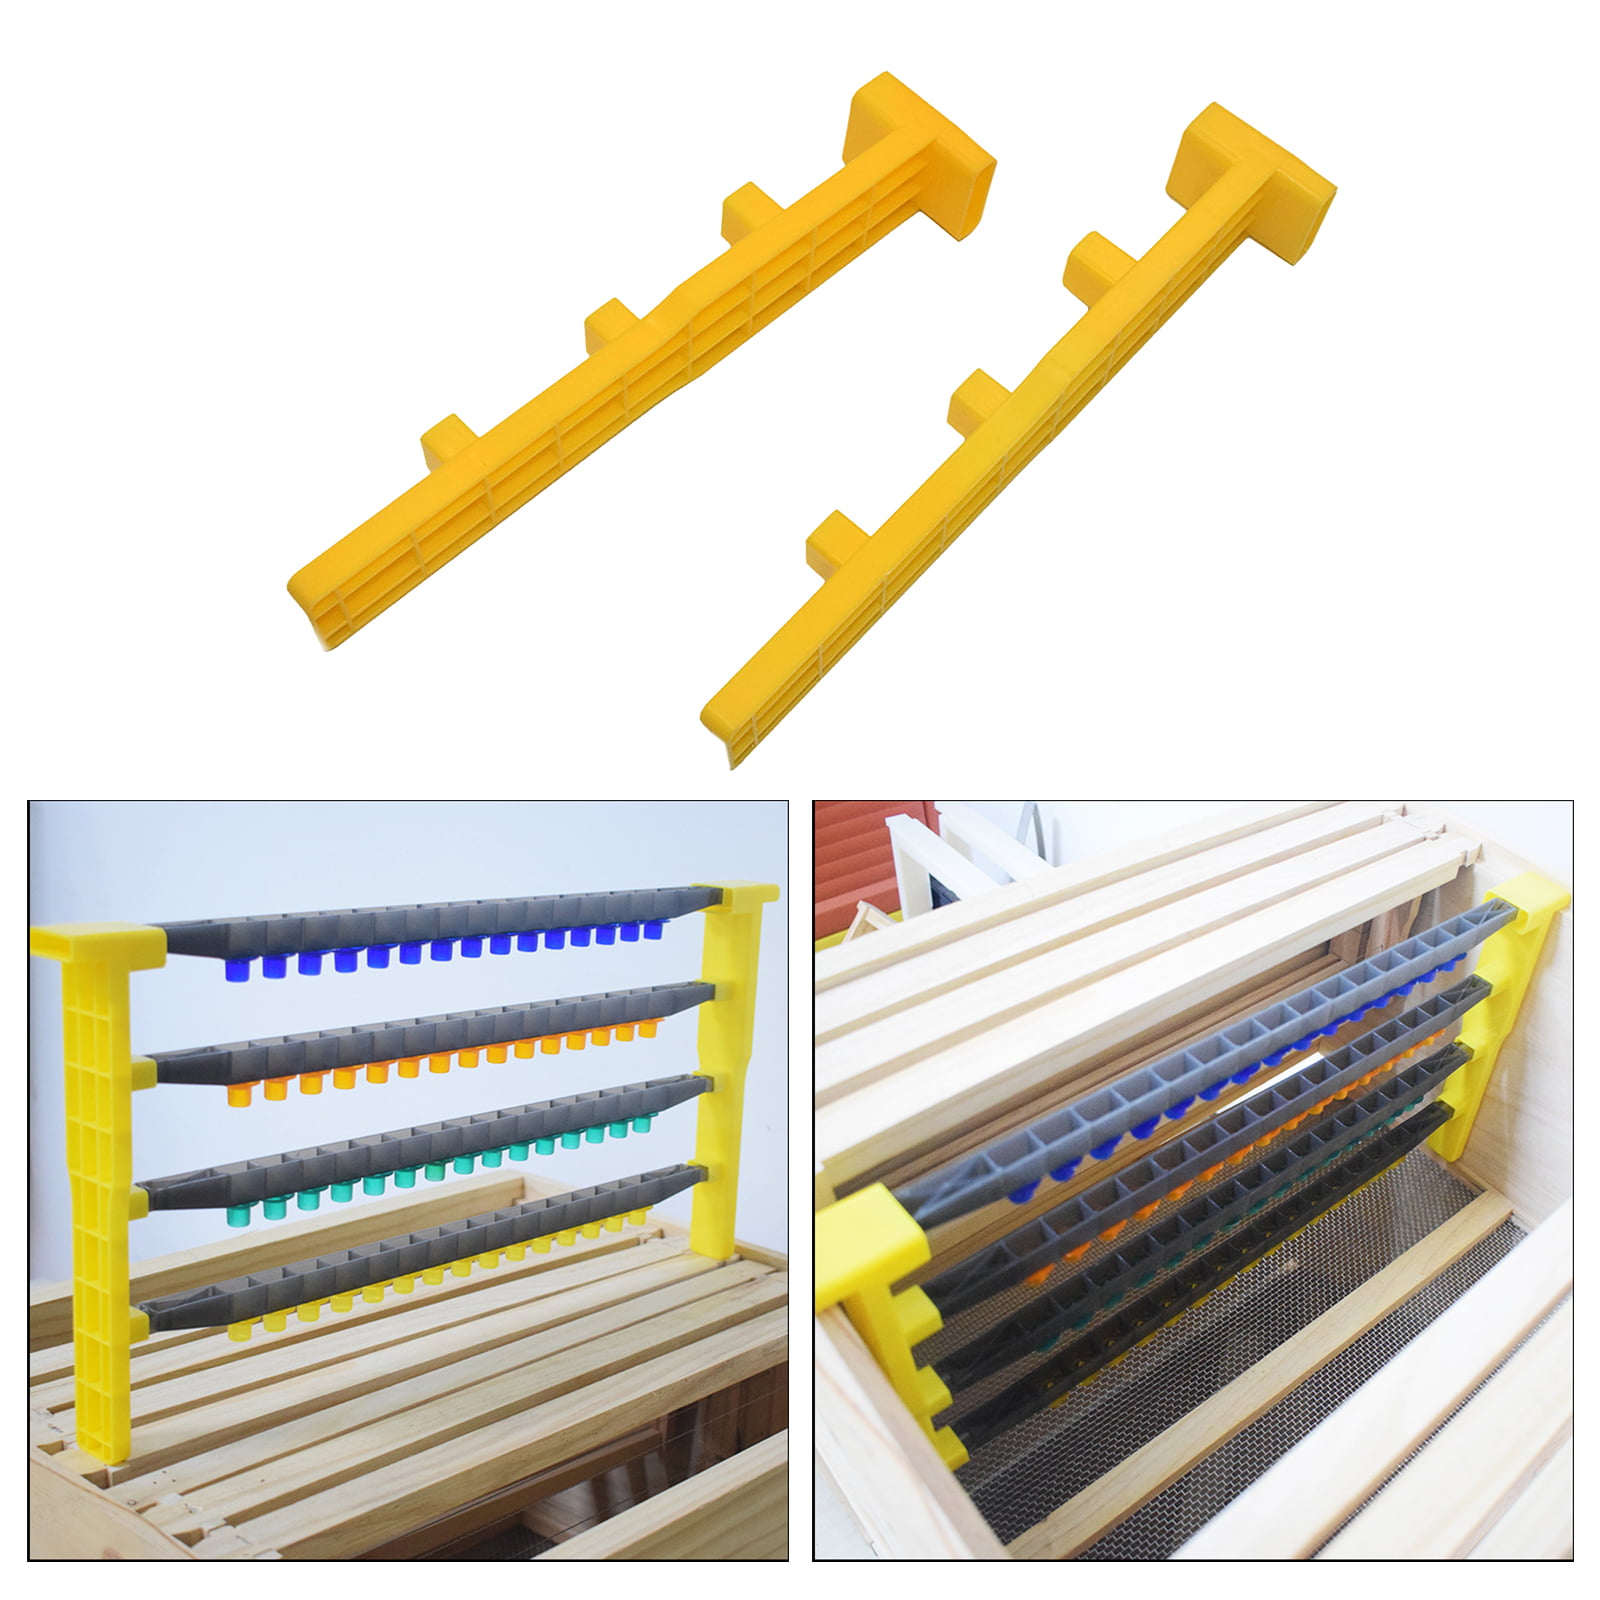 Details about   2/Set Plastic Honey Bee Hive Frame Rack Support Spacer Stand Tools Equipment 